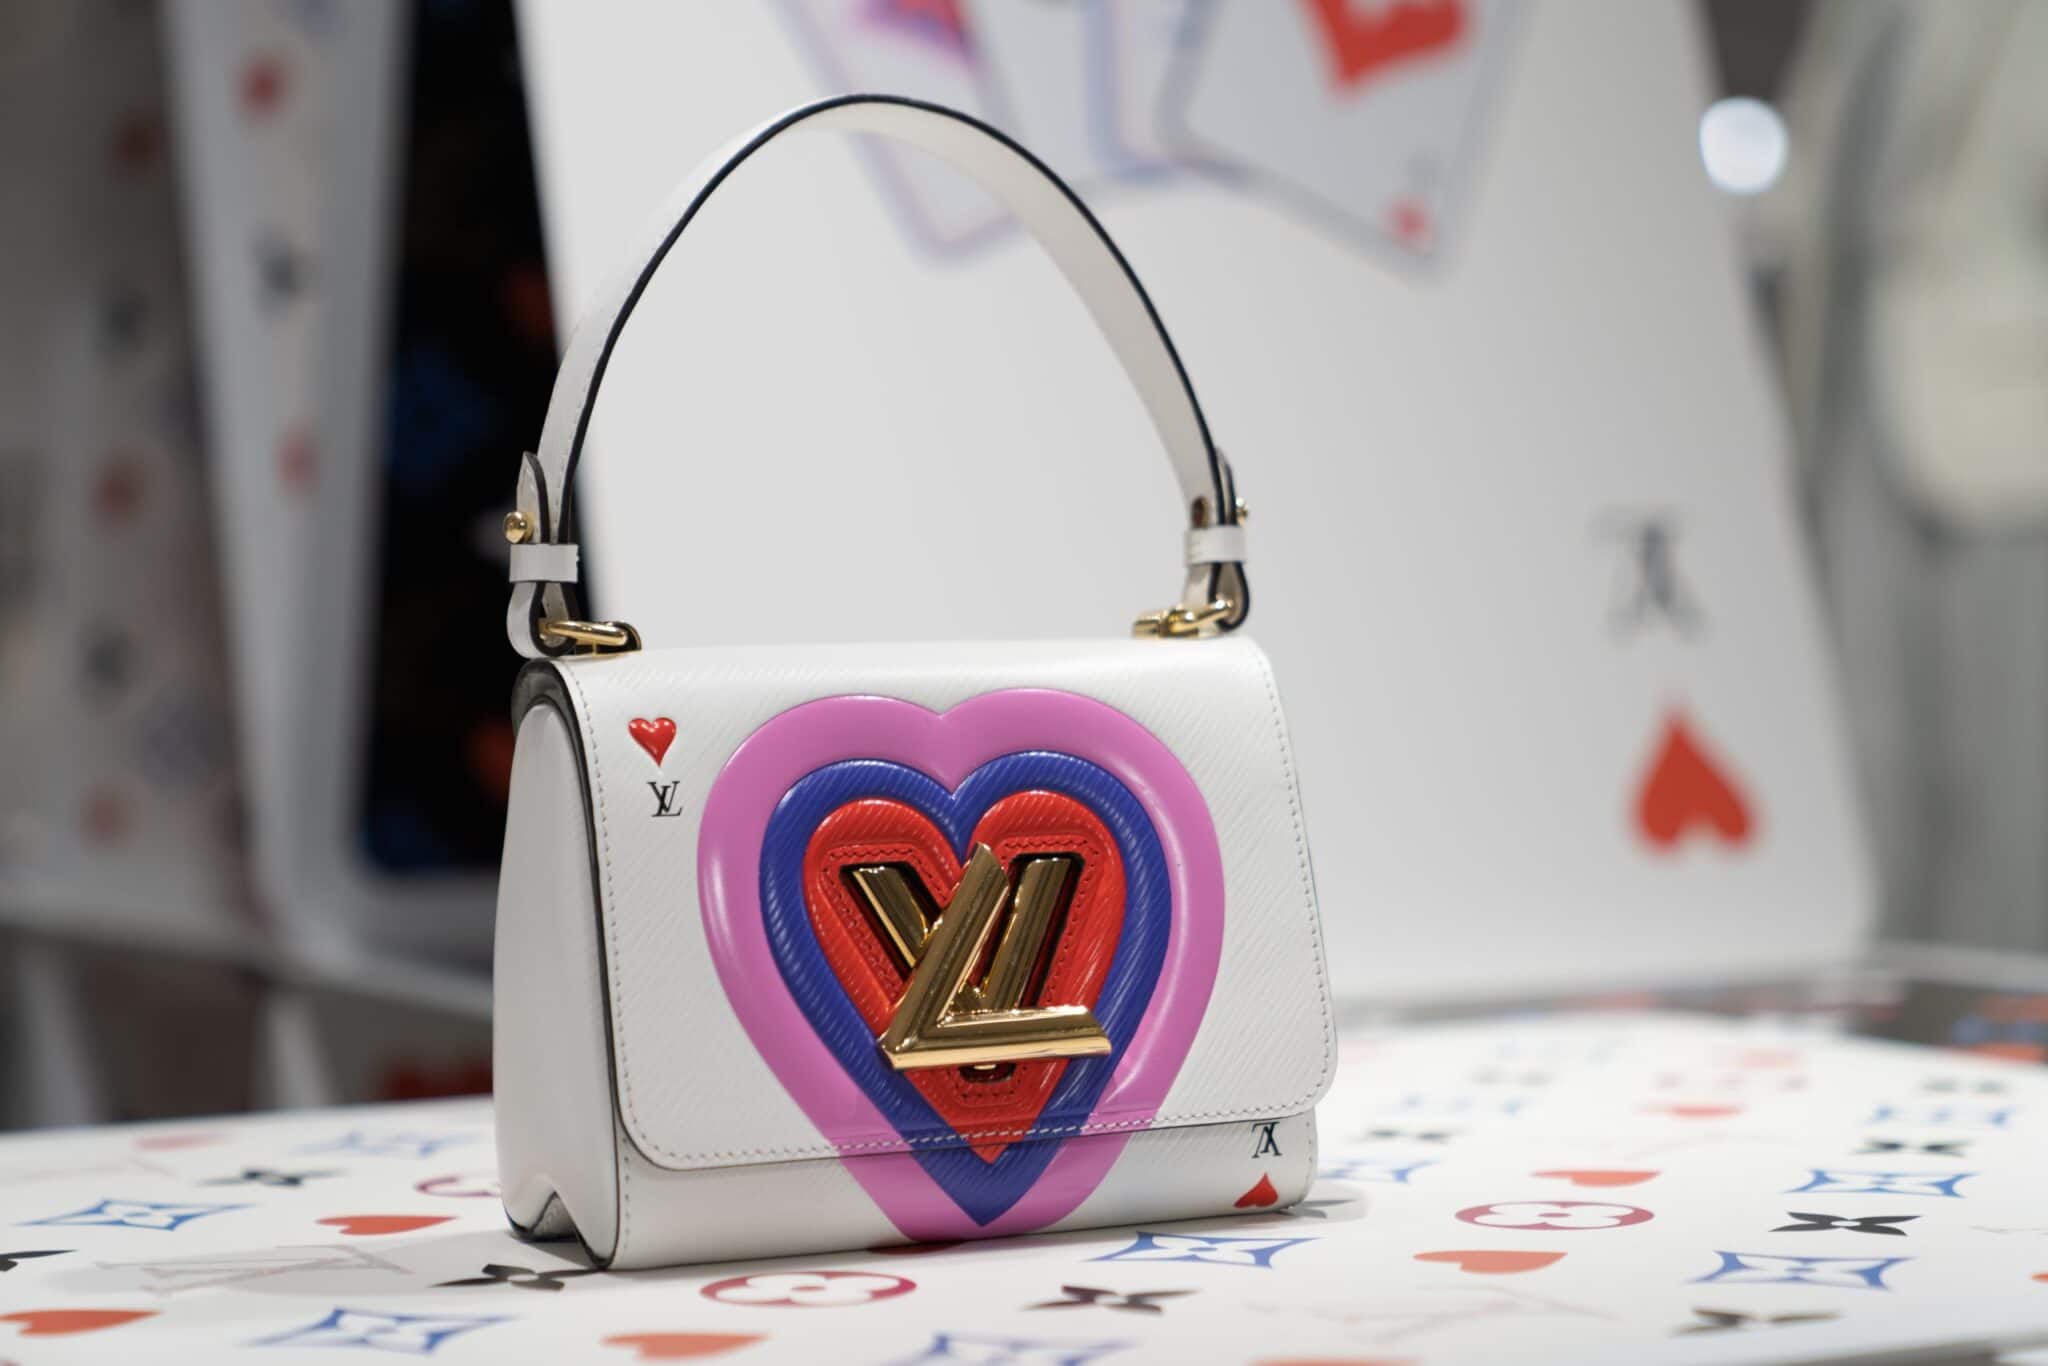 Louis Vuitton Game On Game On Cœur Bag, Cruise 2021 Collection